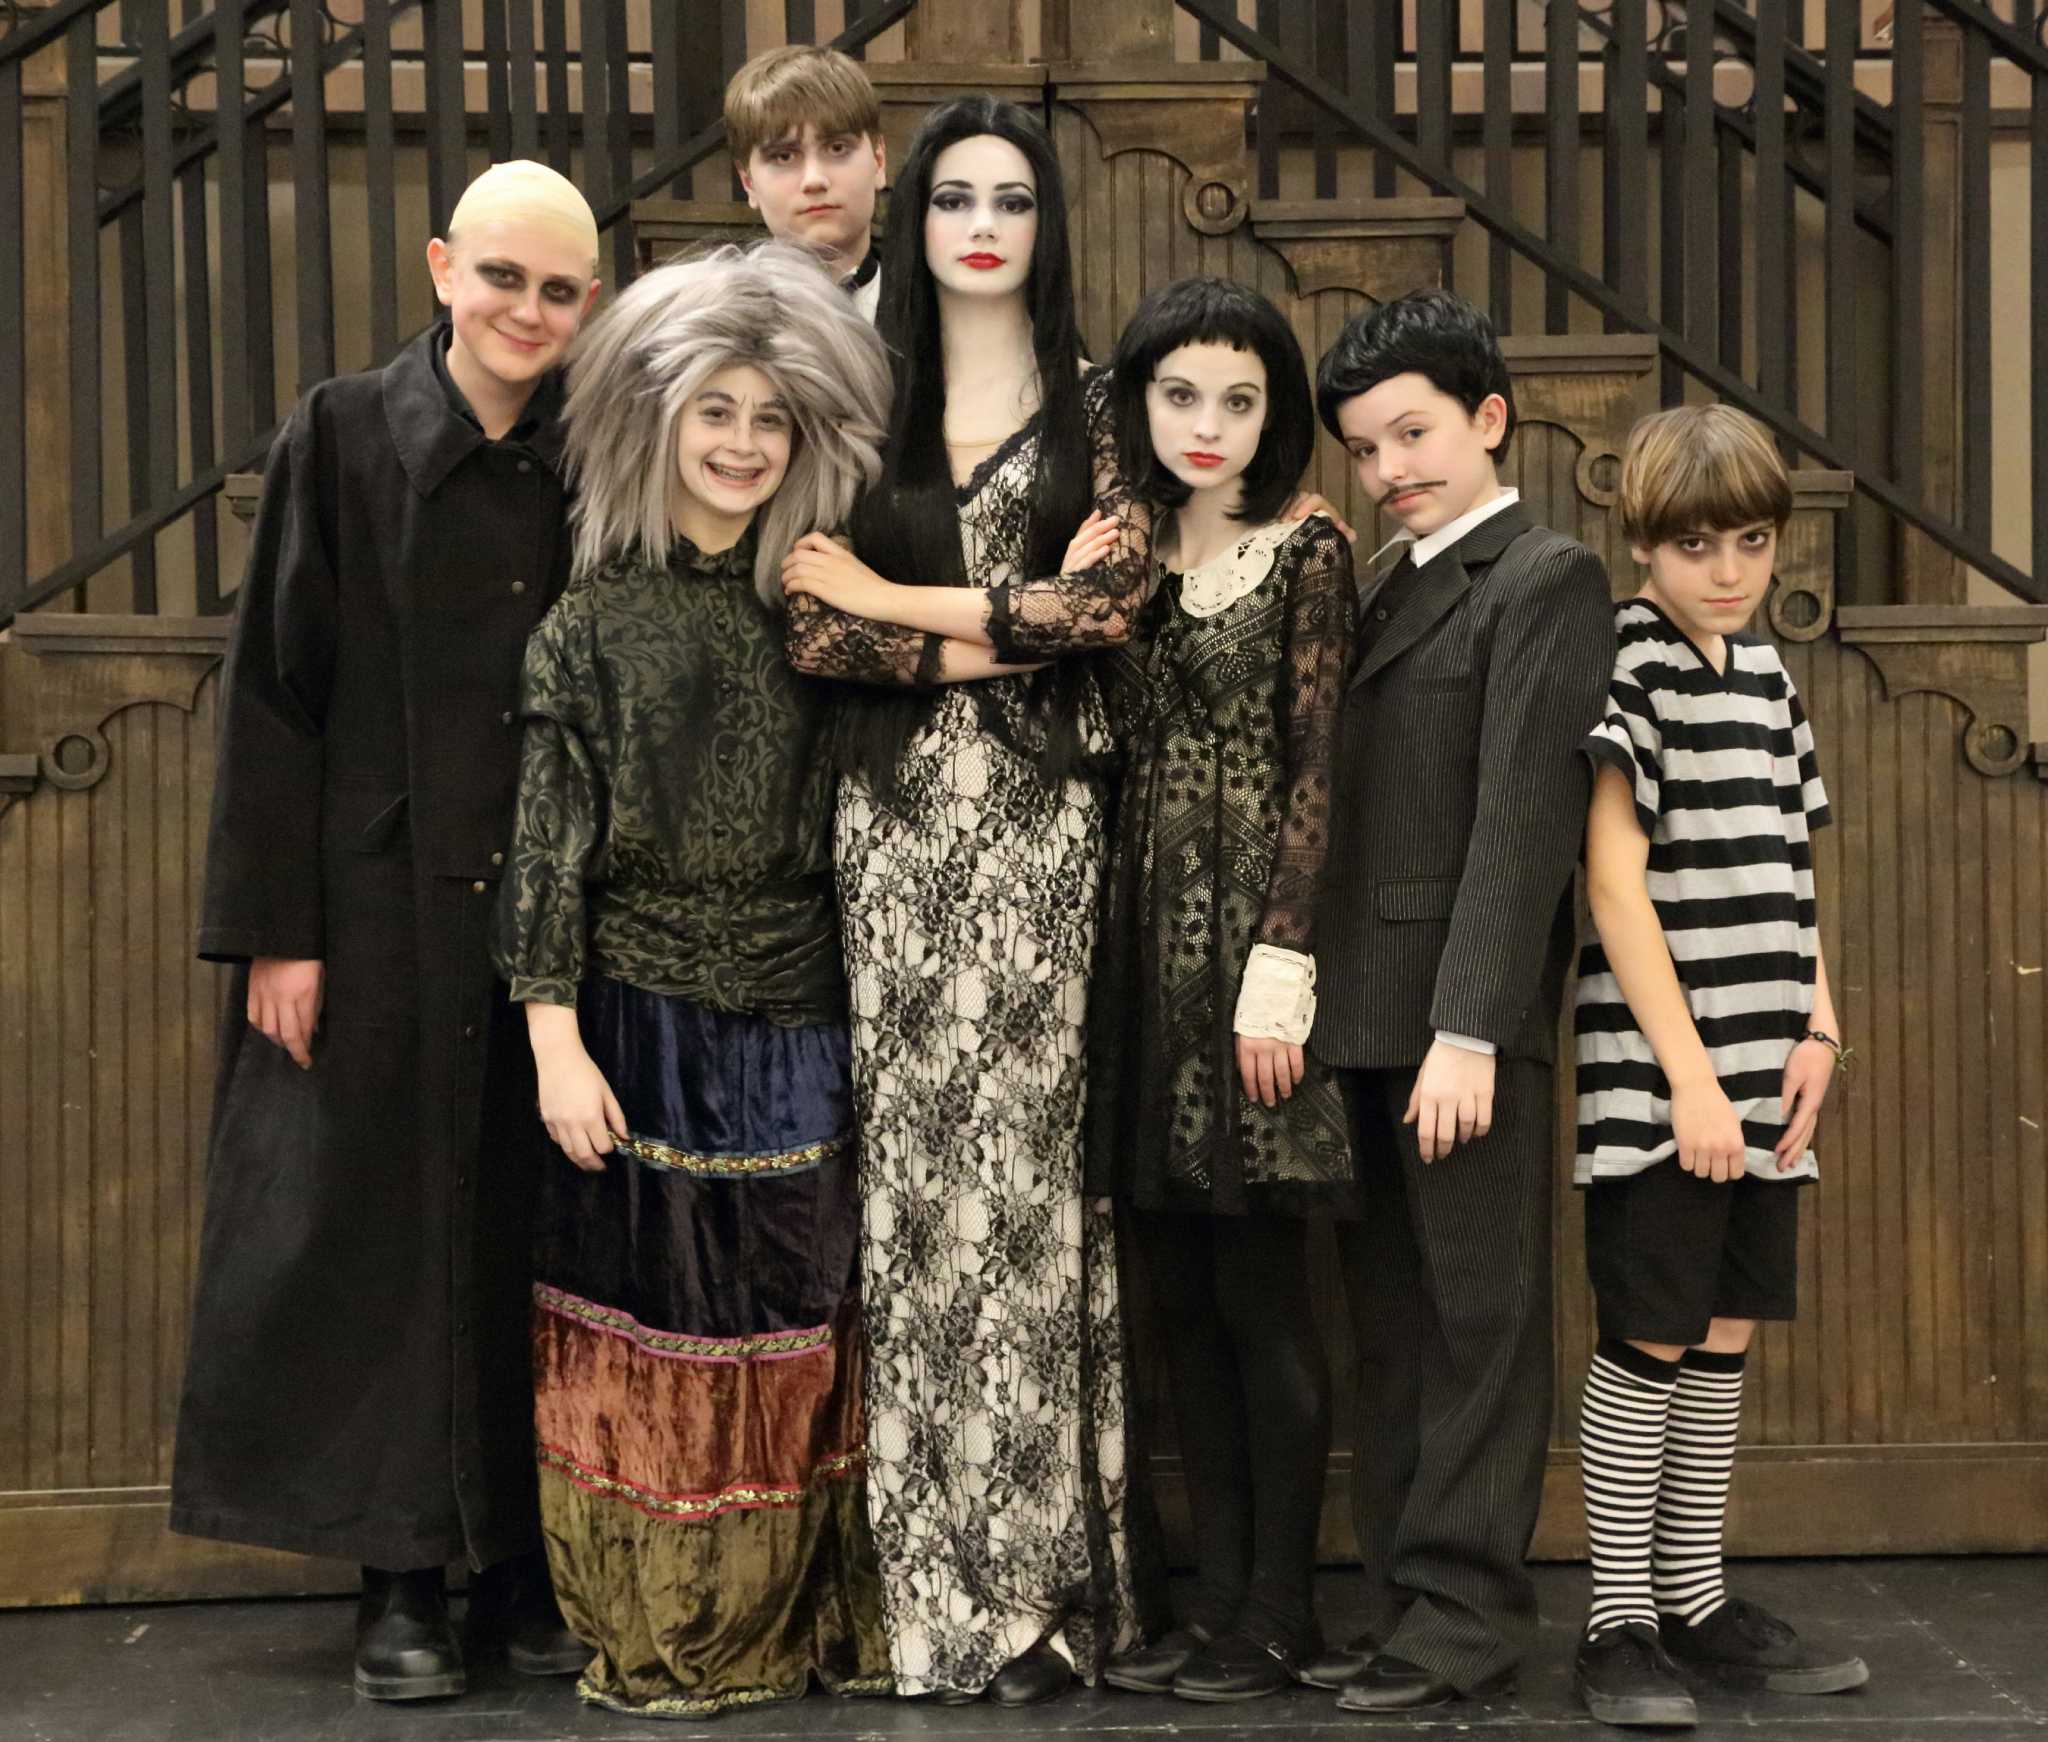 'Addams Family,' a creepy fun fest, coming to Coleytown